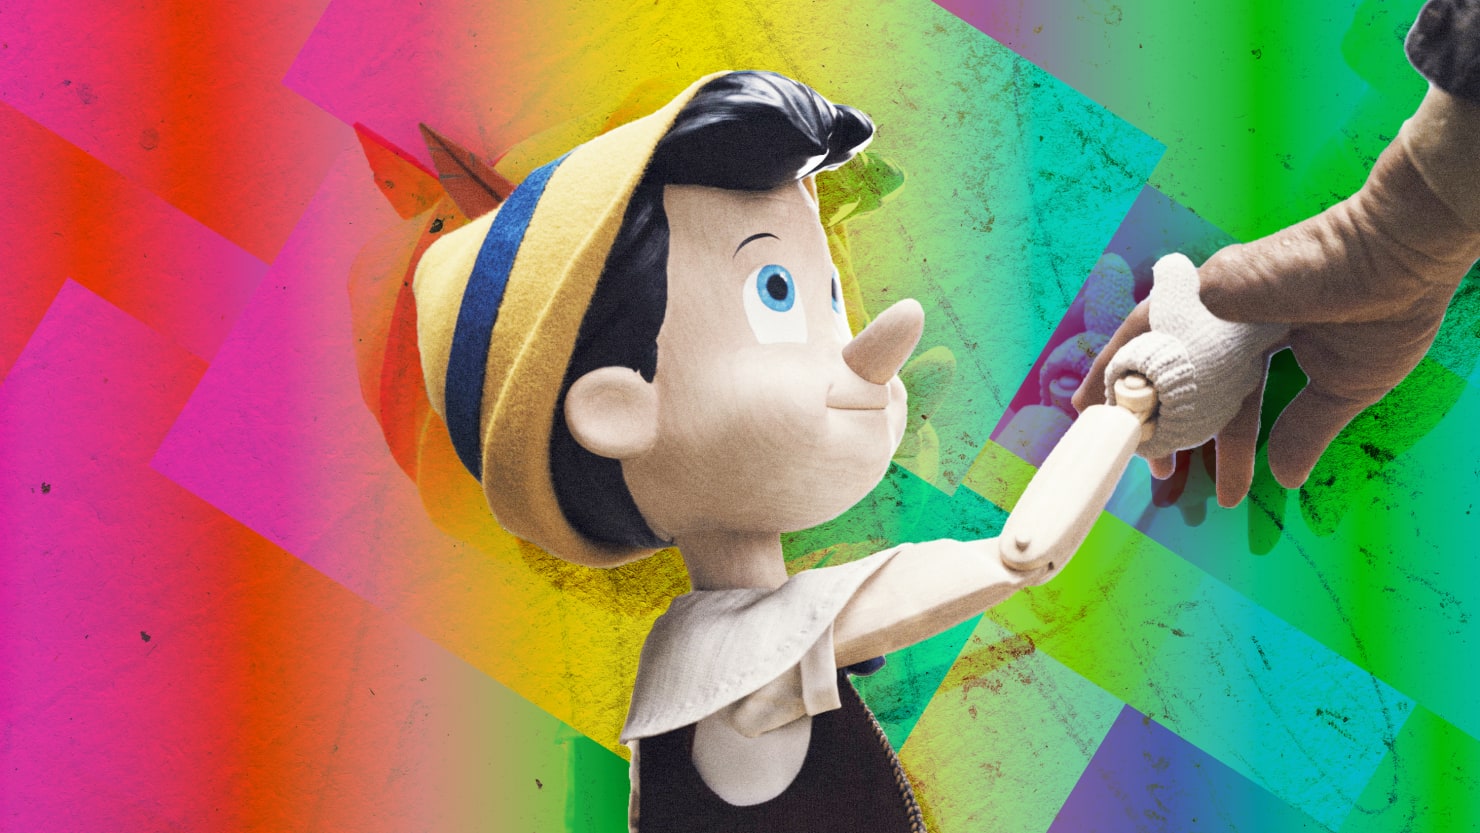 Pinocchio's Biggest Changes Made From Disney's Animated Movie